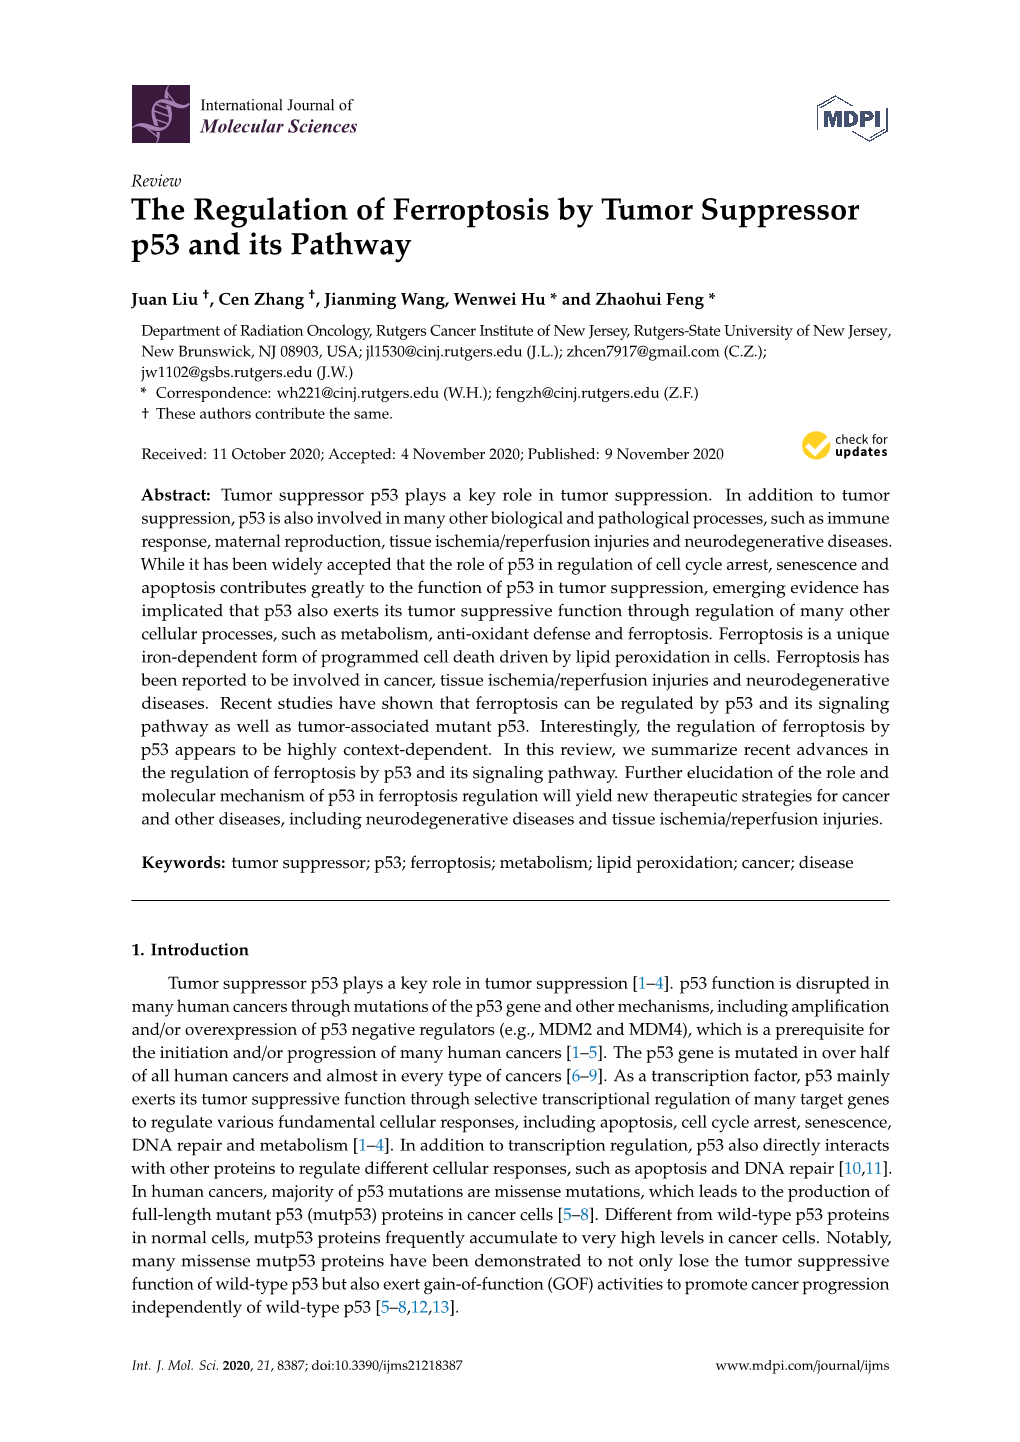 The Regulation of Ferroptosis by Tumor Suppressor P53 and Its Pathway